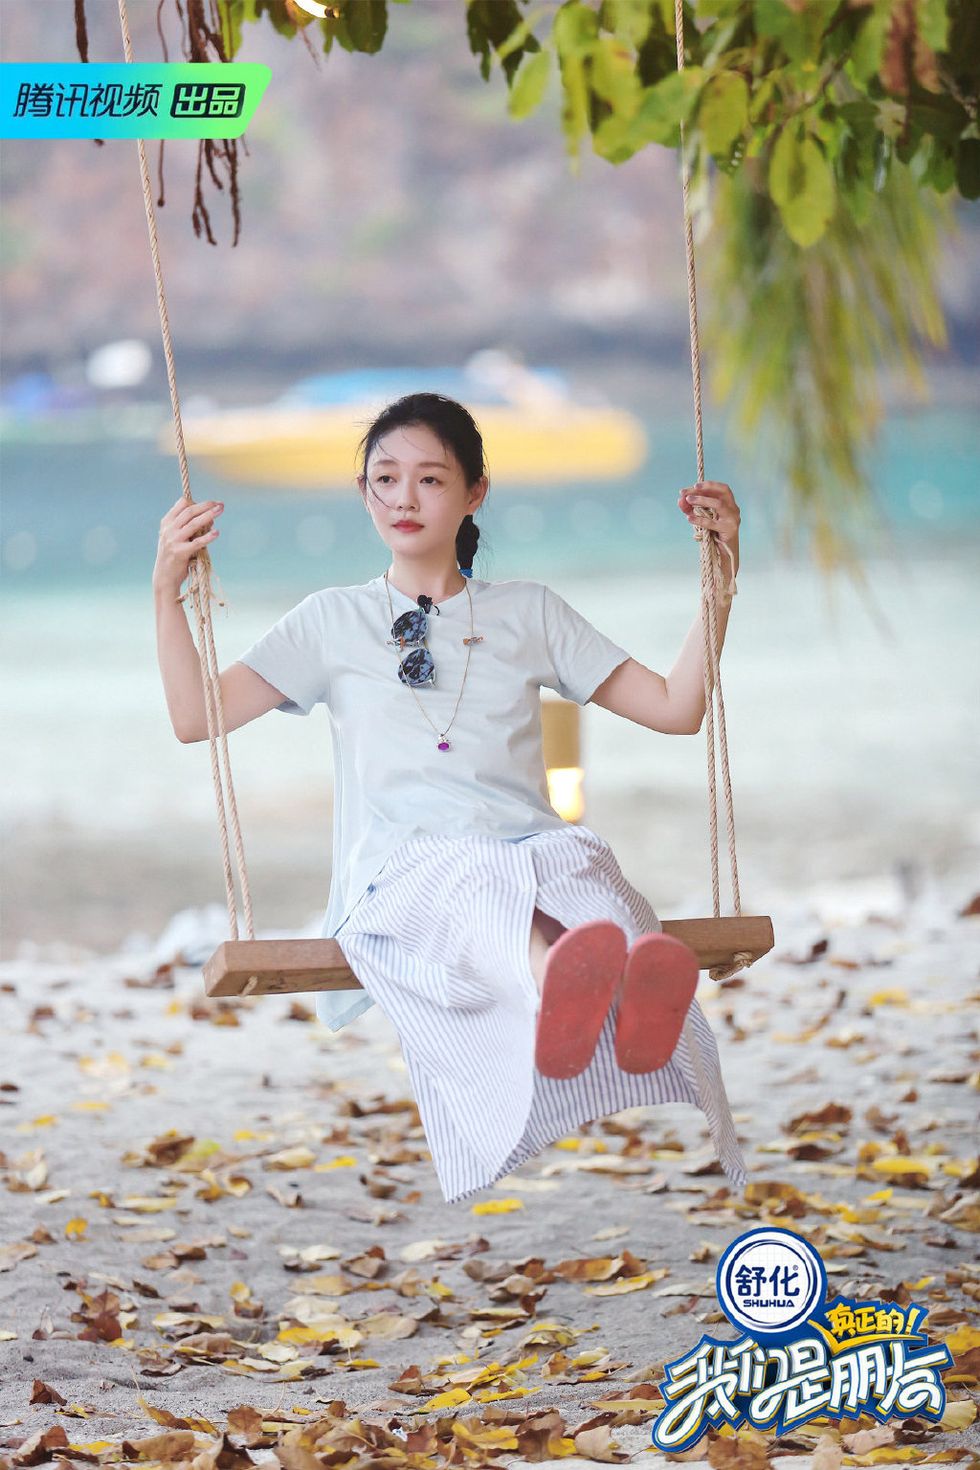 Swing, Leisure, Photography, Tree, Plant, Happy, Autumn, Outdoor play equipment, Smile, 